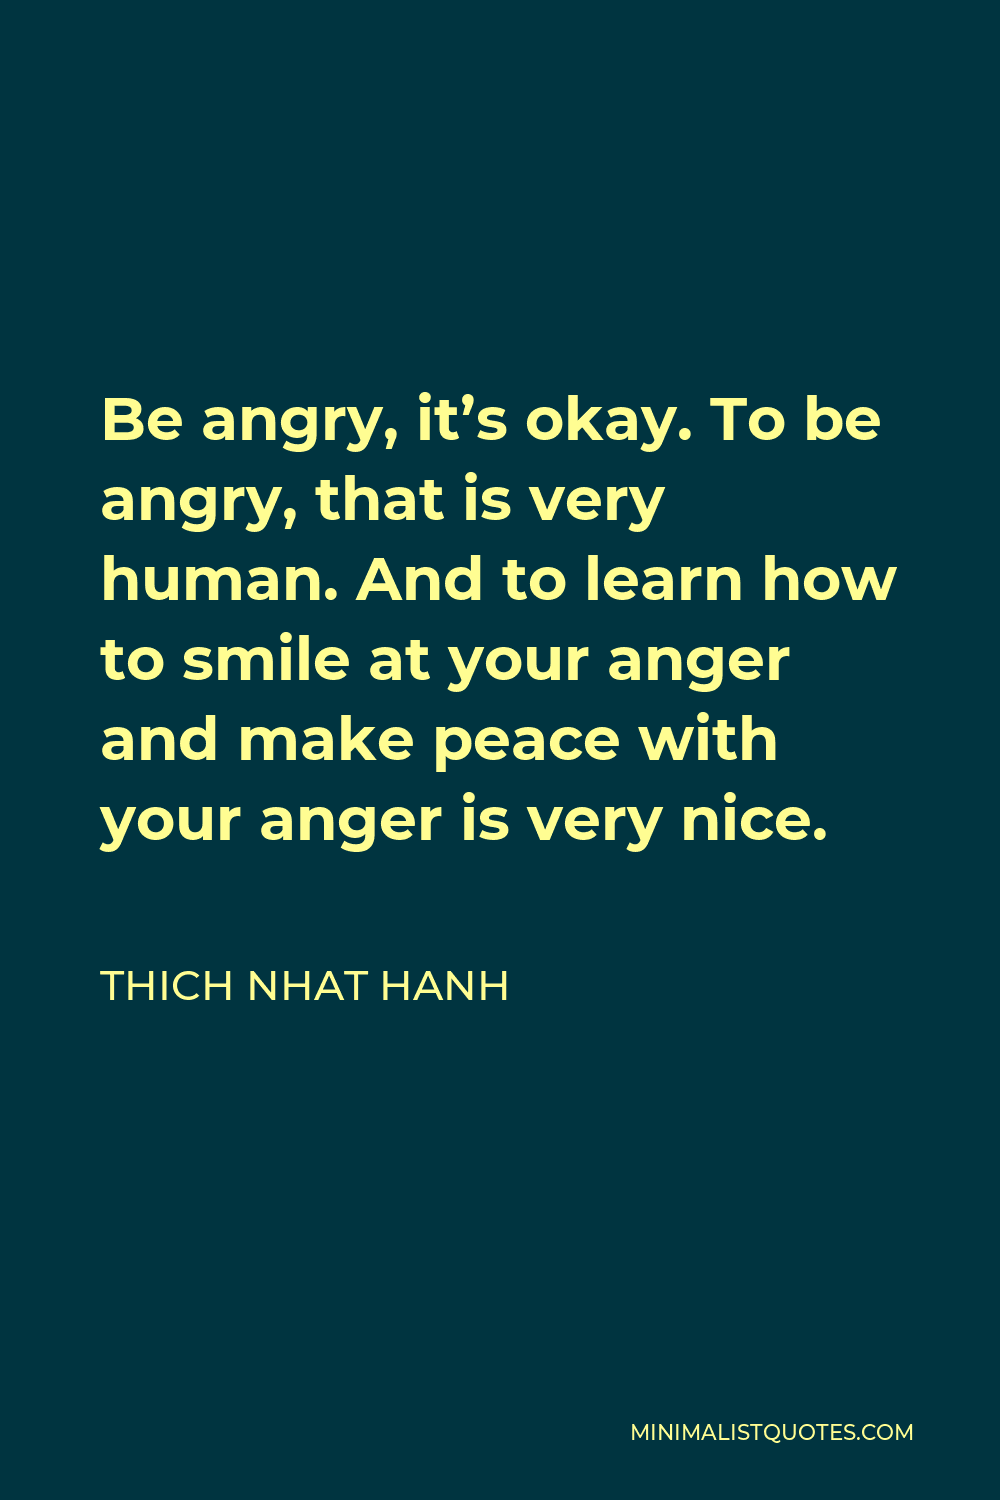 Thich Nhat Hanh Quote - Be angry, it’s okay. To be angry, that is very human. And to learn how to smile at your anger and make peace with your anger is very nice.